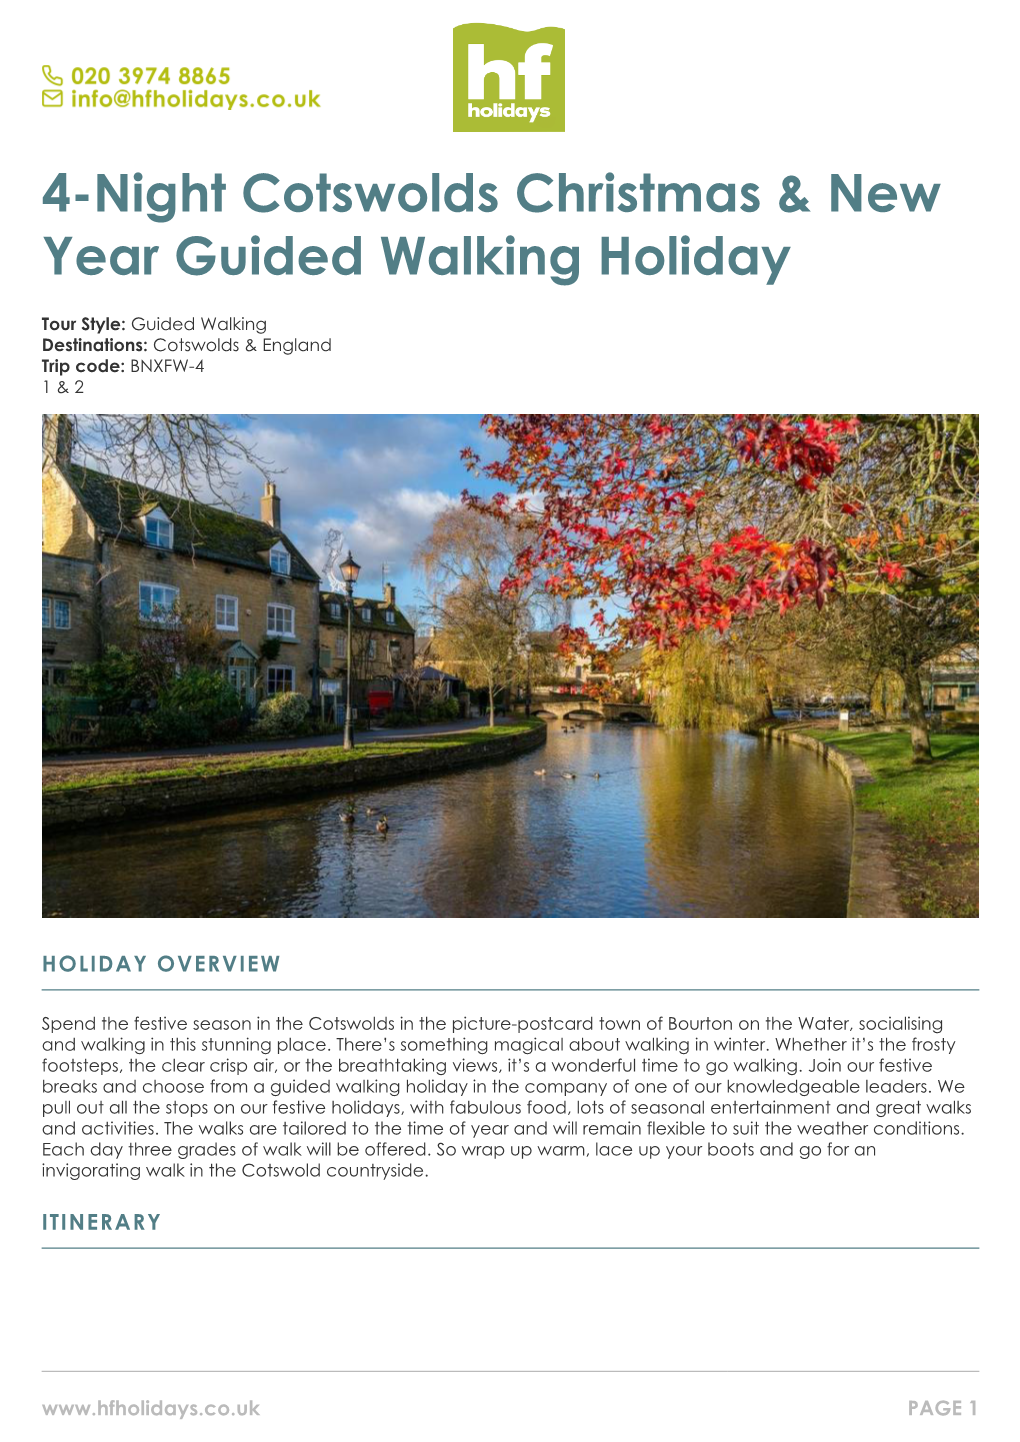 4-Night Cotswolds Christmas & New Year Guided